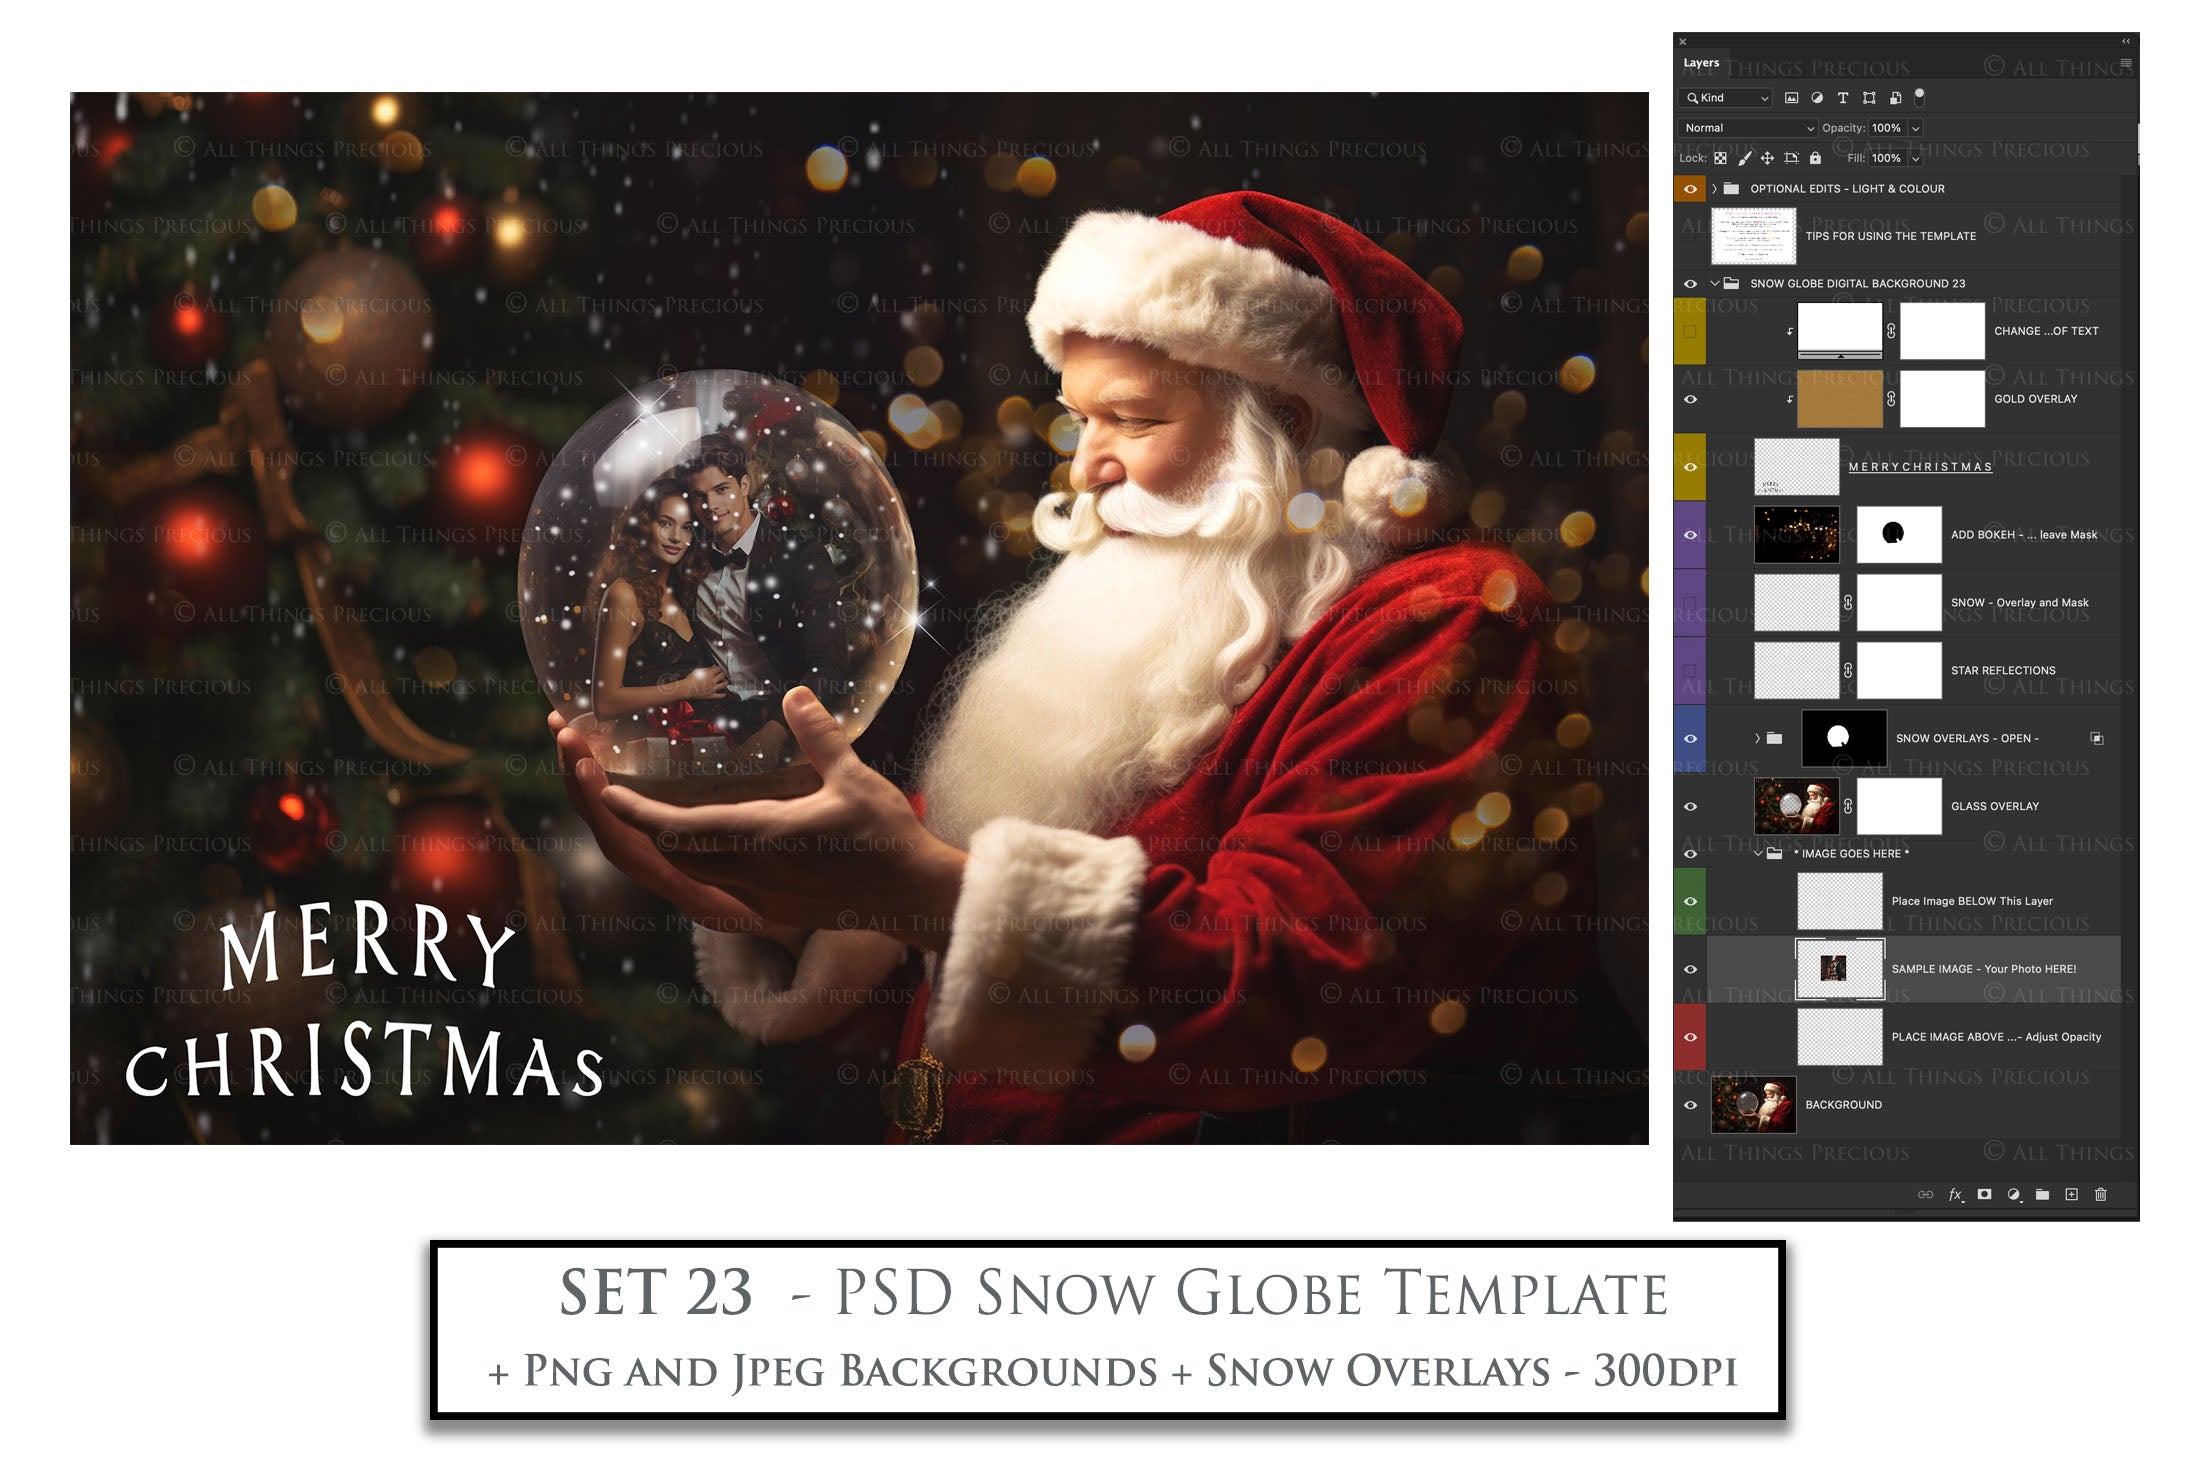 Digital Snow Globe Background. Png snow and glow overlays with PSD Template. The globe is transparent, perfect for adding your own images and retain the glass effect. Nutcracker Mouse Christmas. The file is 6000 x 4000, 300dpi. Png Included. Use for Xmas edits, Photography, Card Crafts, Scrapbooking. ATP Textures